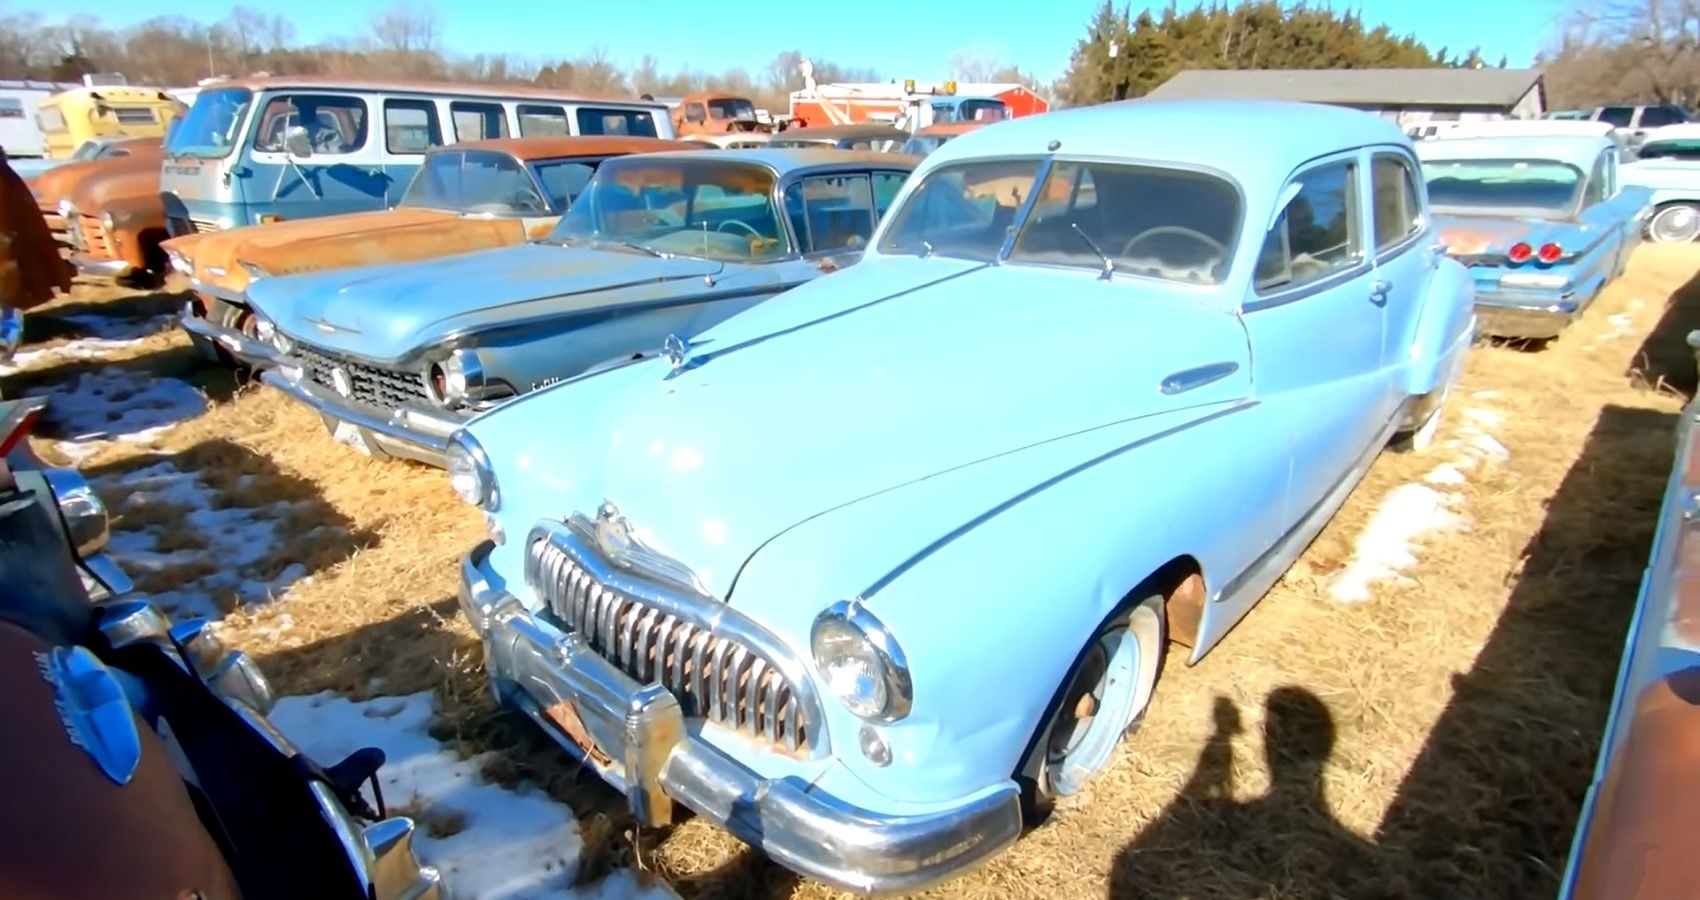 It’s A Mystery Why So Many Classic Cars Got Left To Rust In This Field